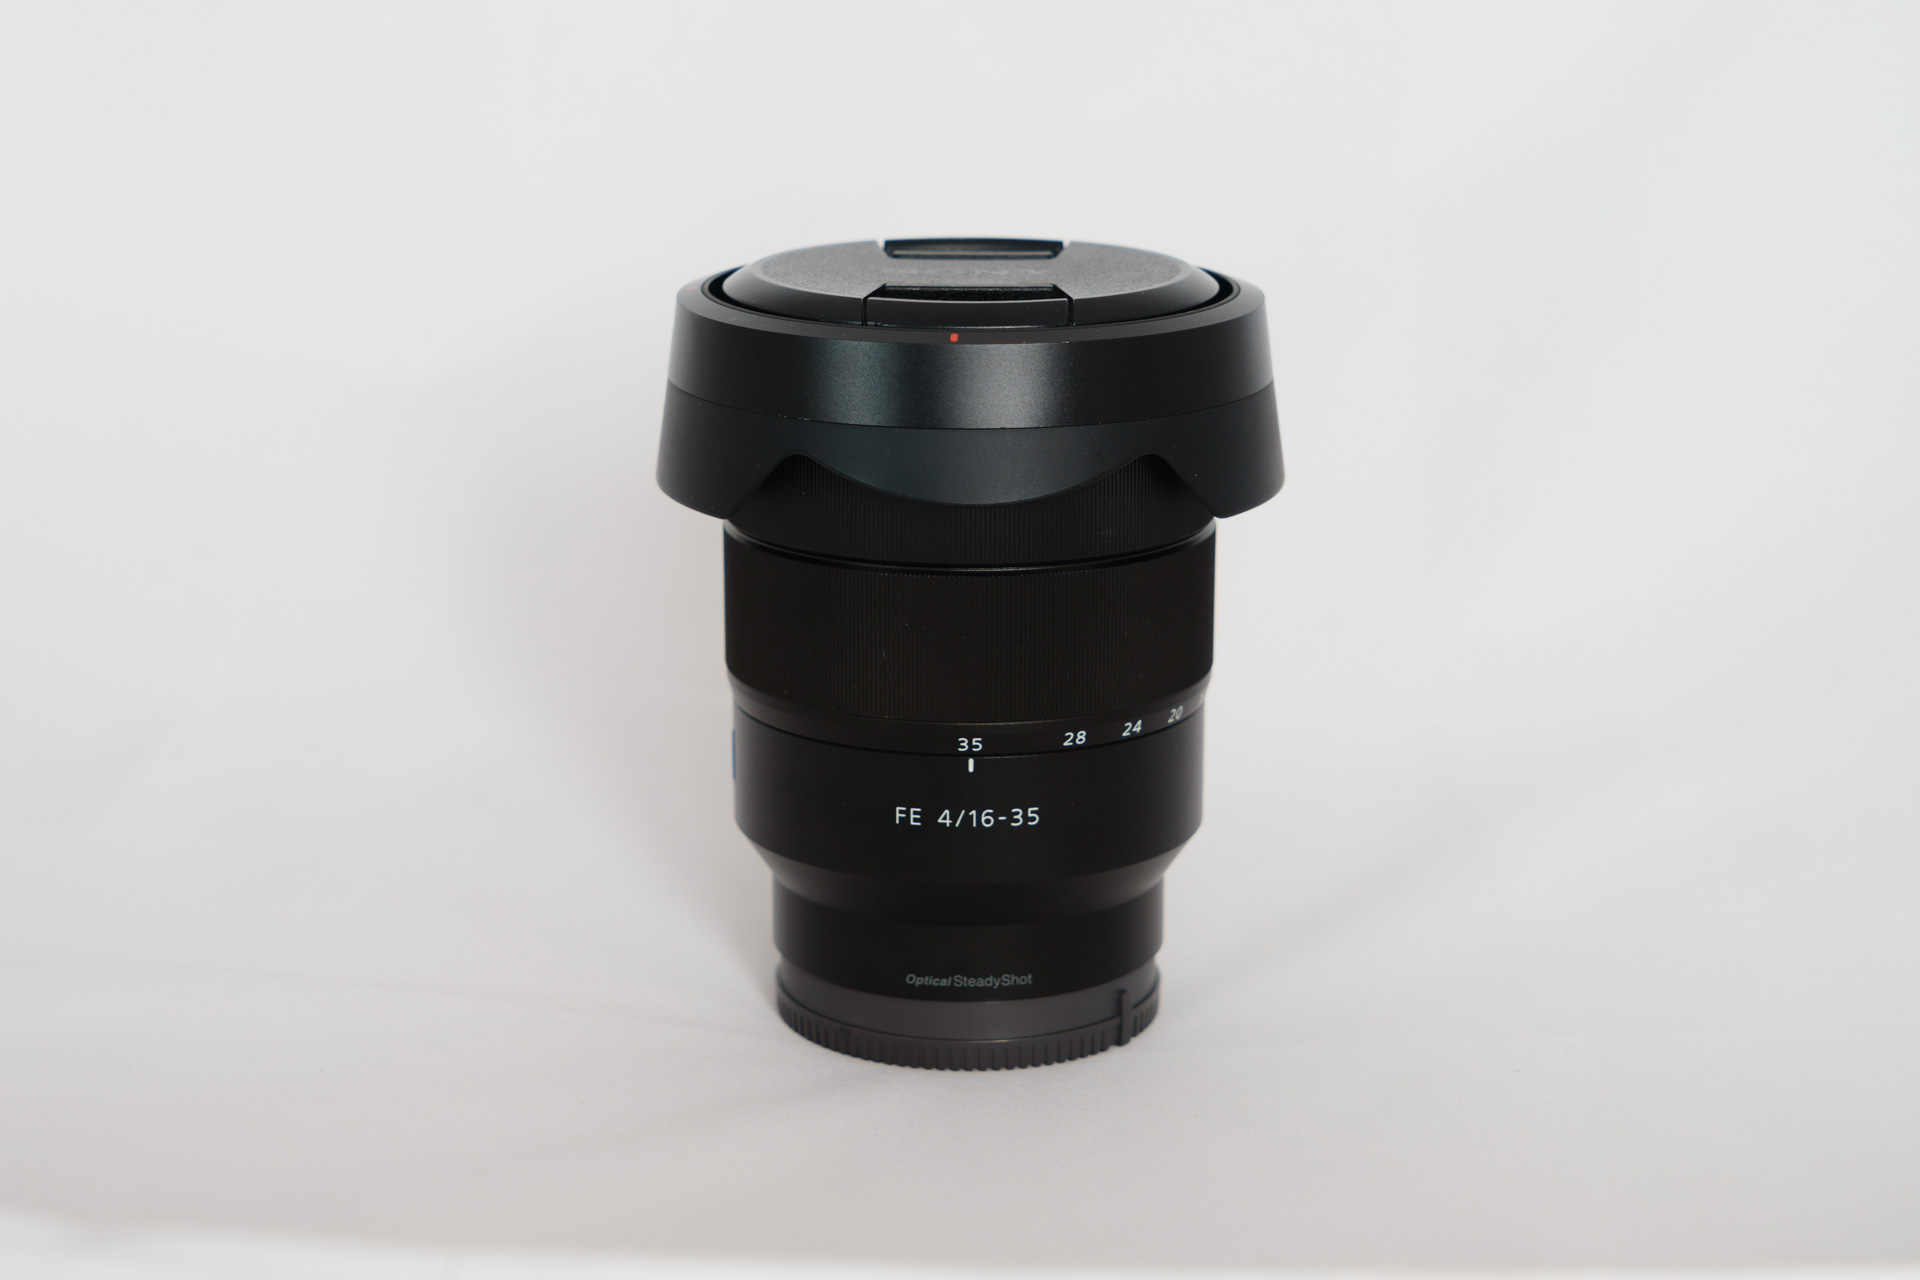 The Sony Zeiss FE 16-35mm f/4 Lens Review — Tools and Toys